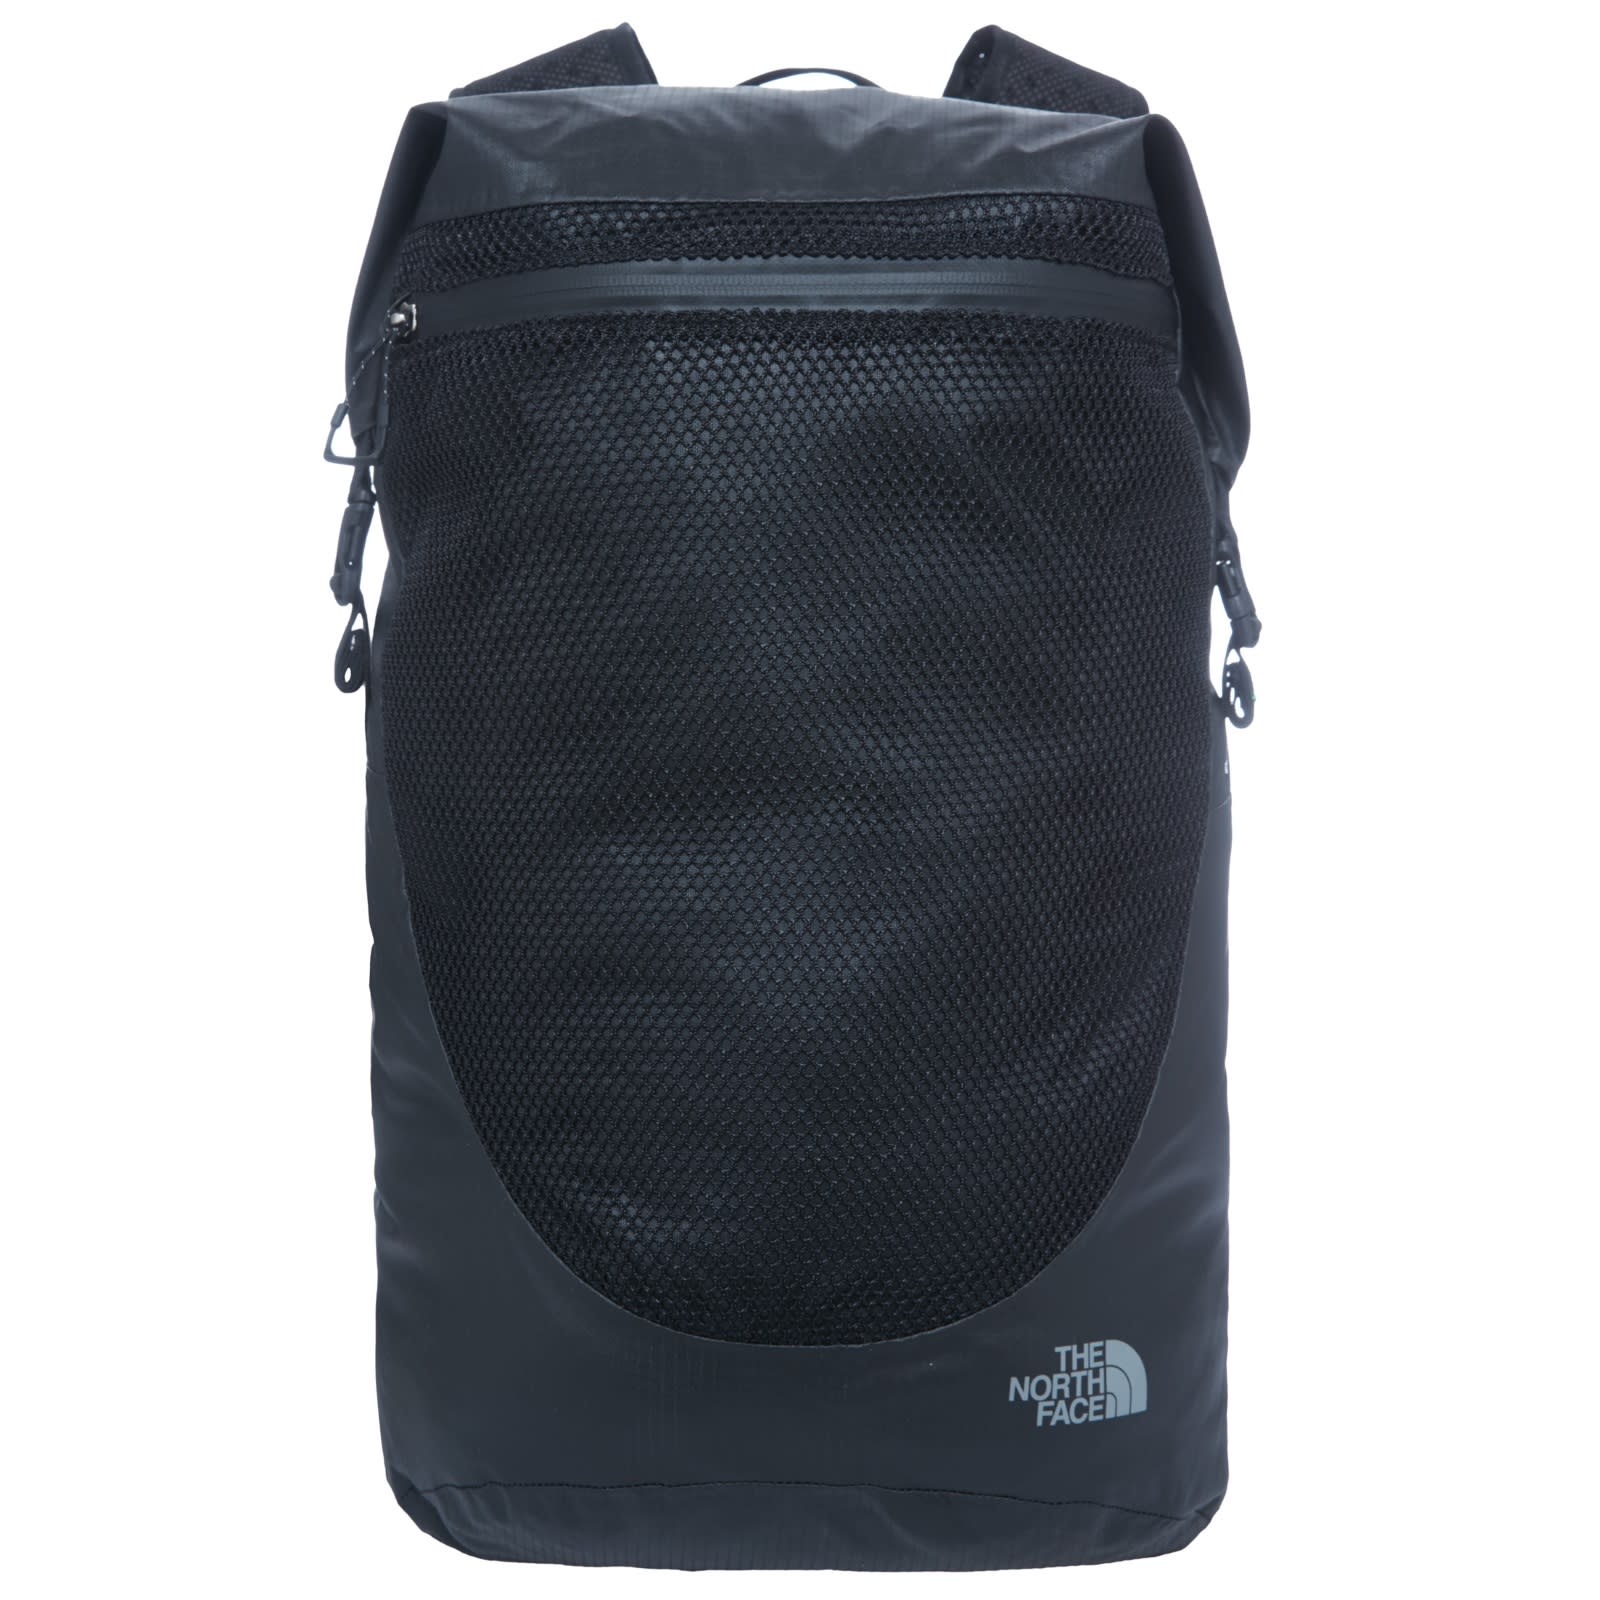 Buy North Face Waterproof Daypack from Outnorth